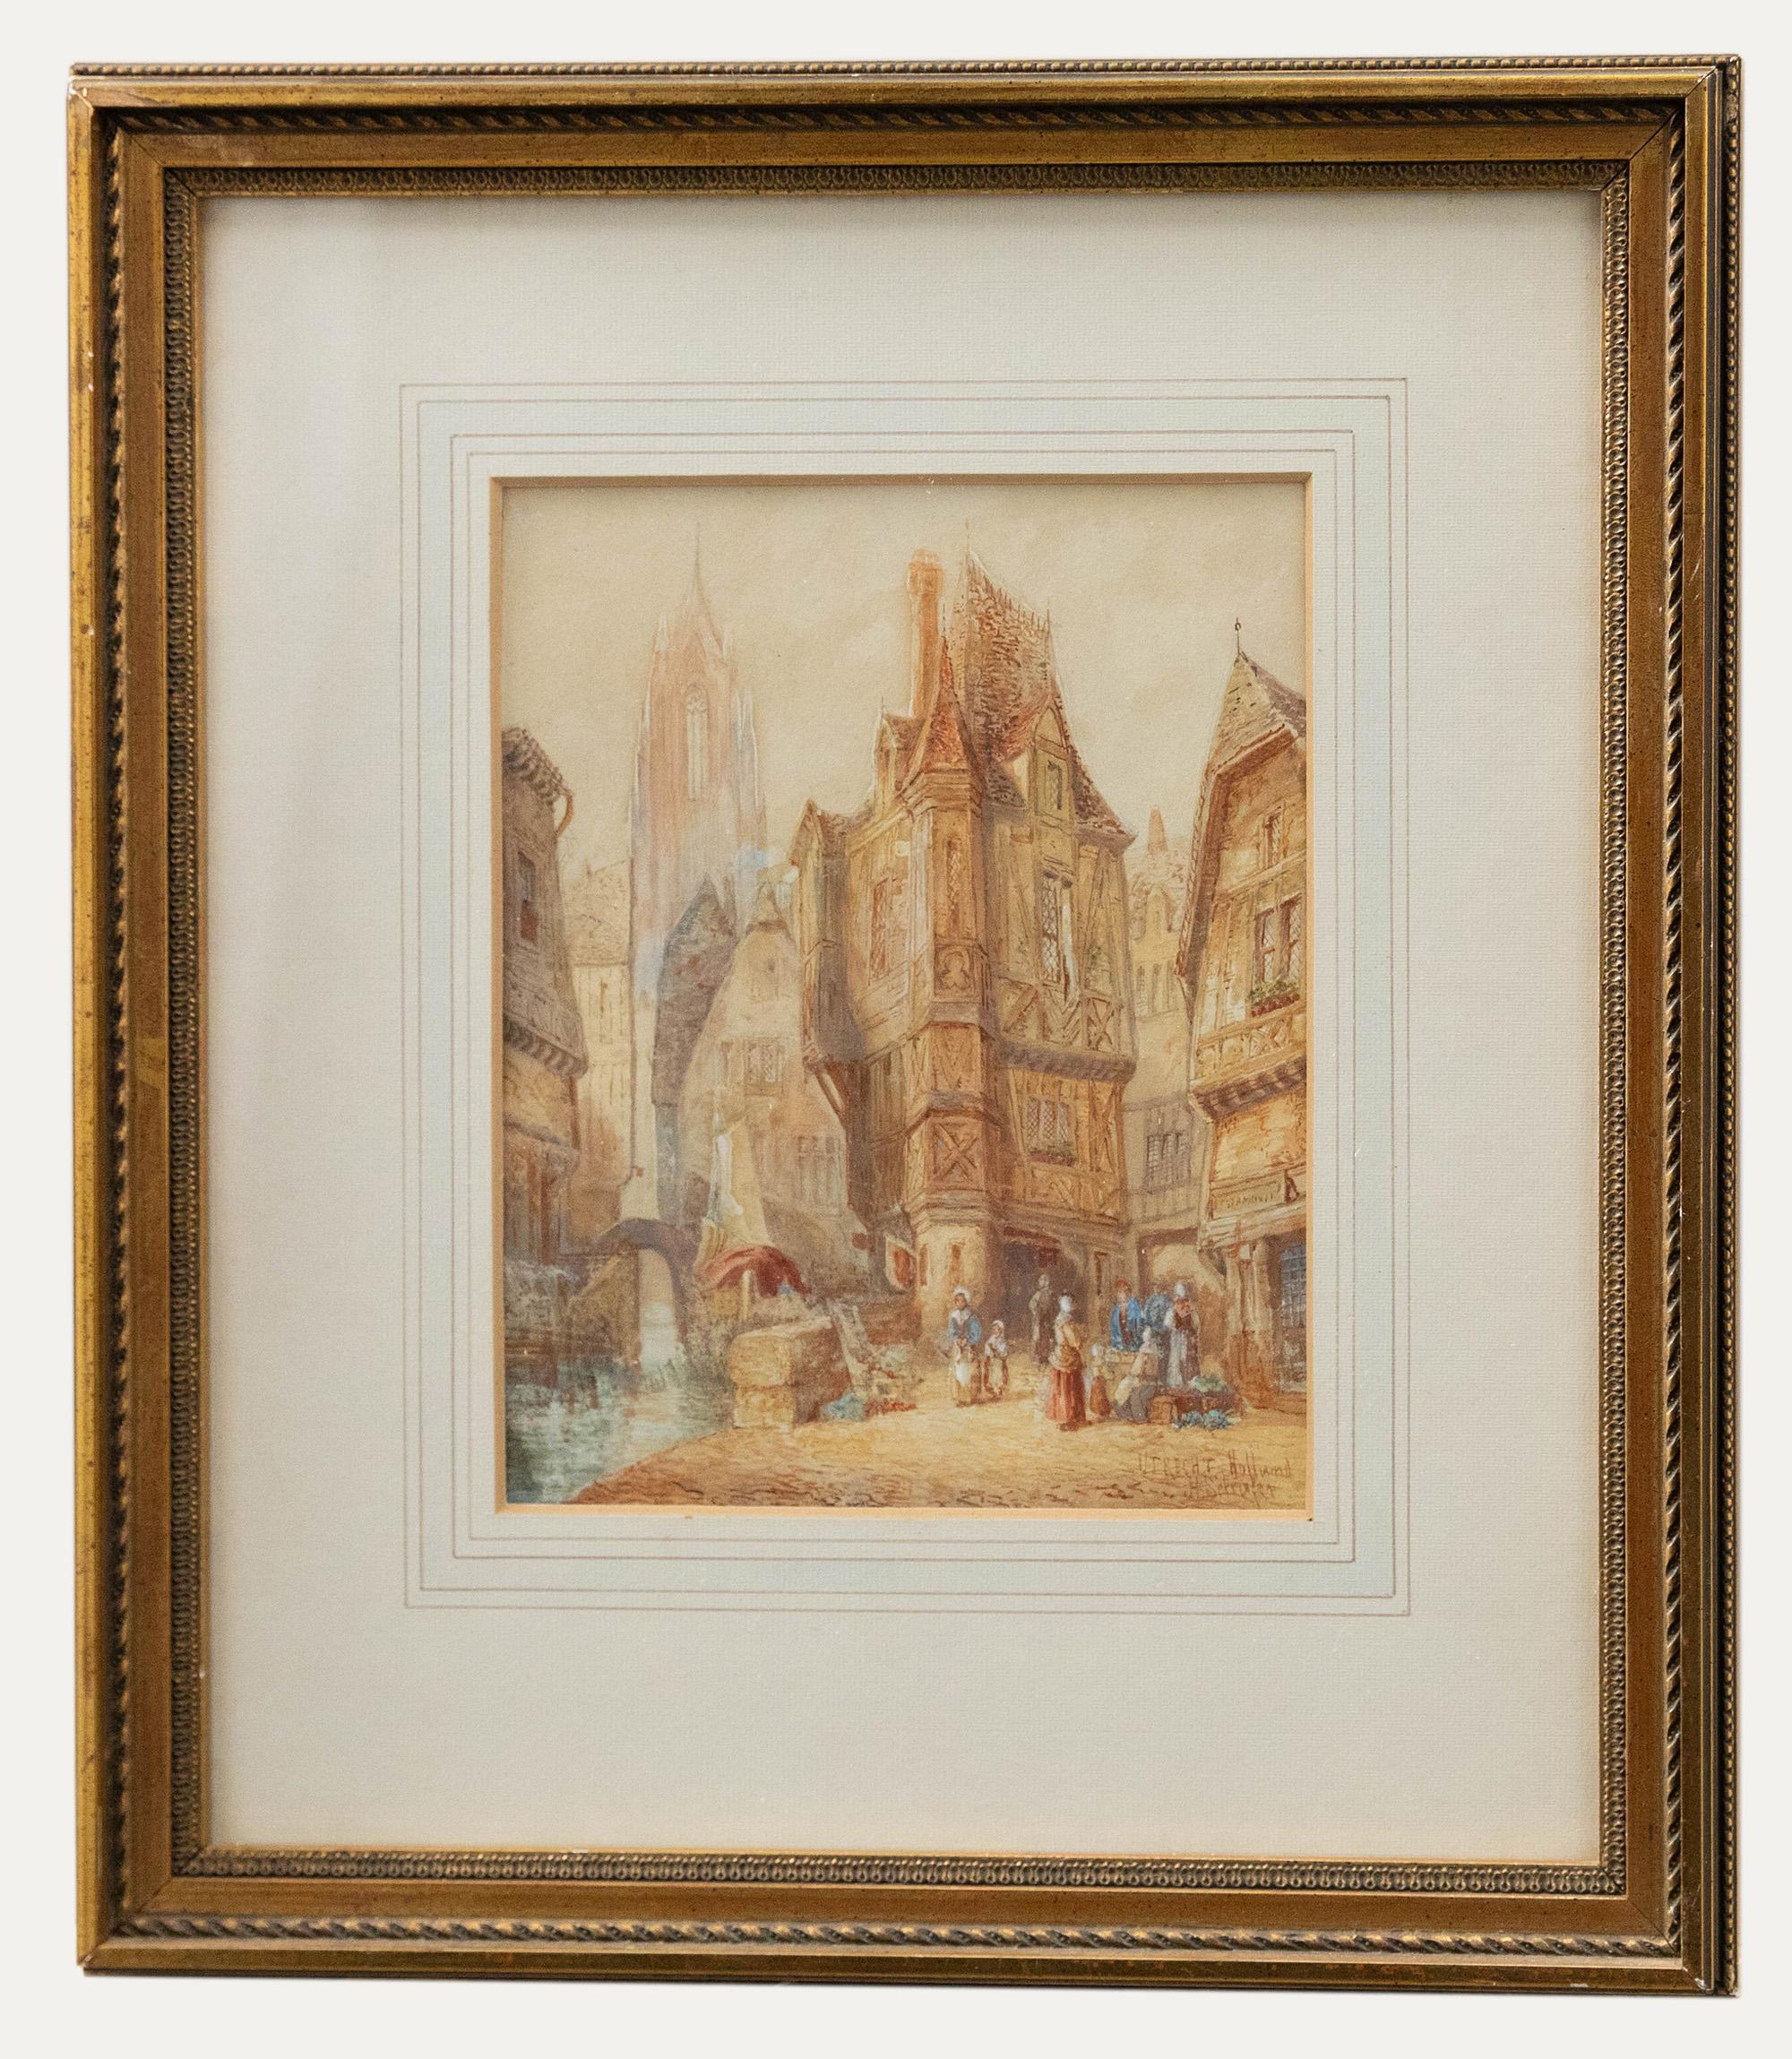 An intricate watercolour scene by highly collectable artist Henry Schafer (1833-1916). Signed and titled to the lower right. Presented in a gilt frame with a ribbon and stick running pattern. On paper.